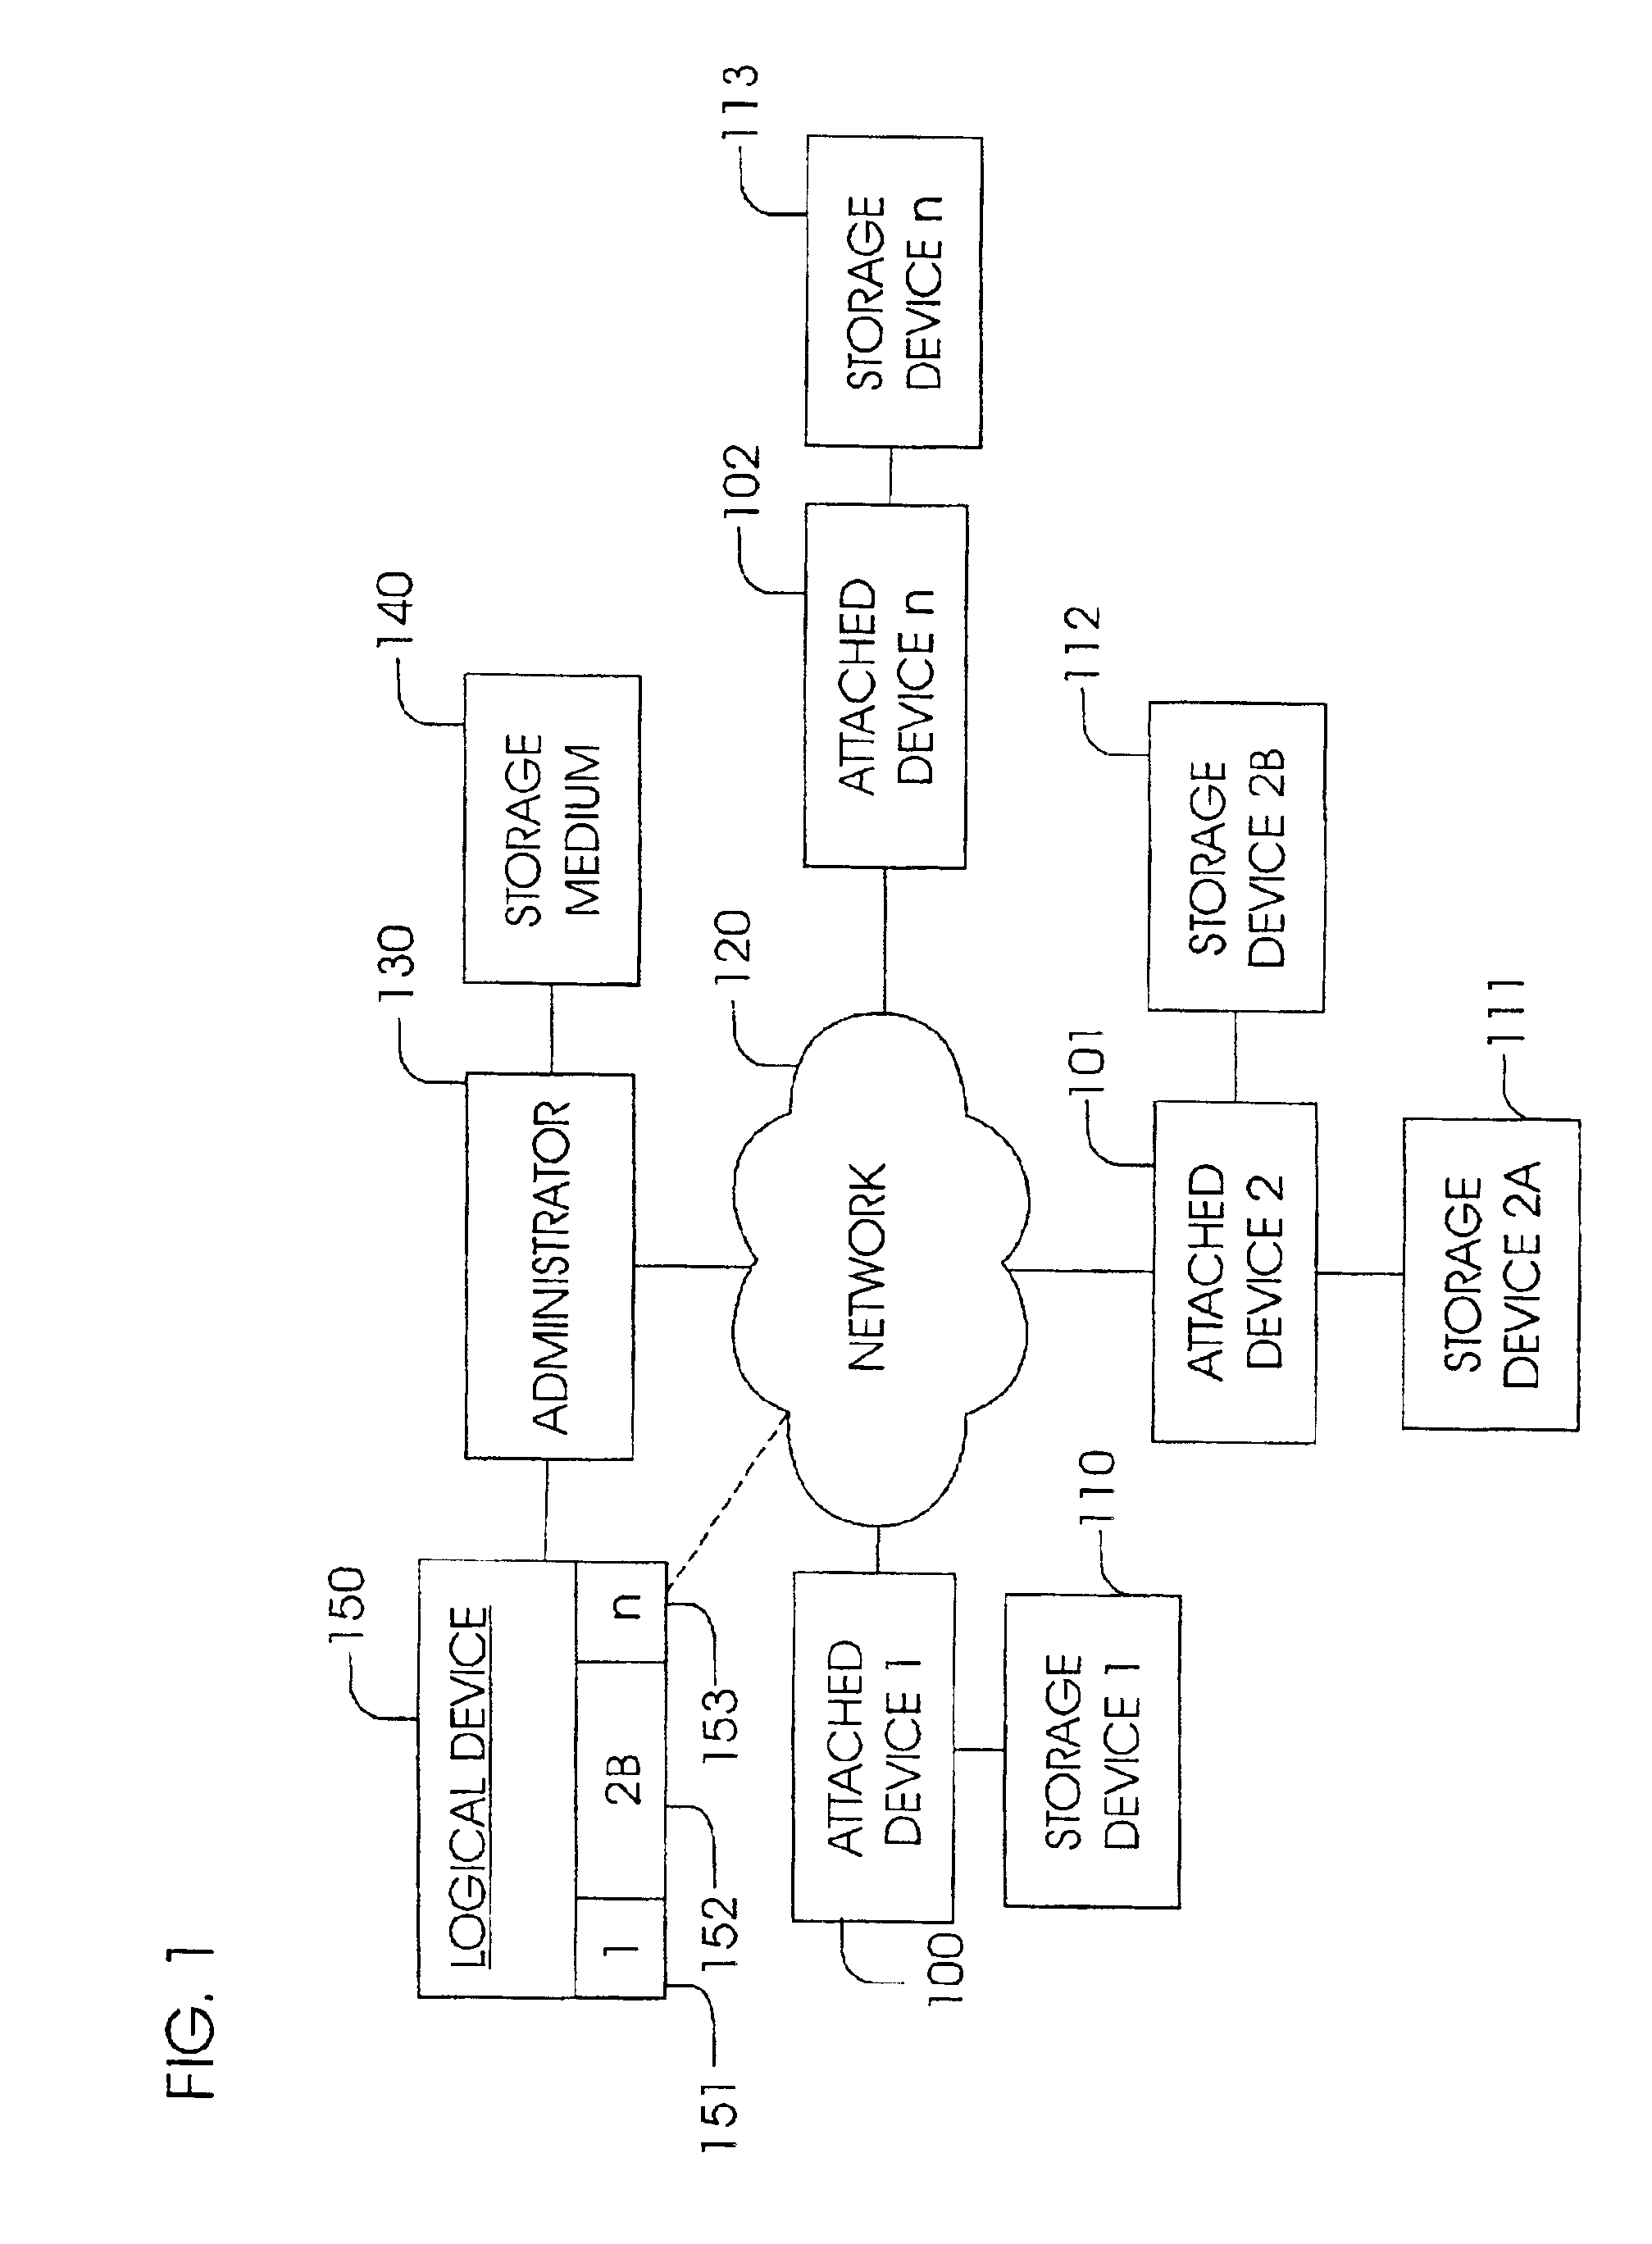 Apparatus and method for configuring storage capacity on a network for common use